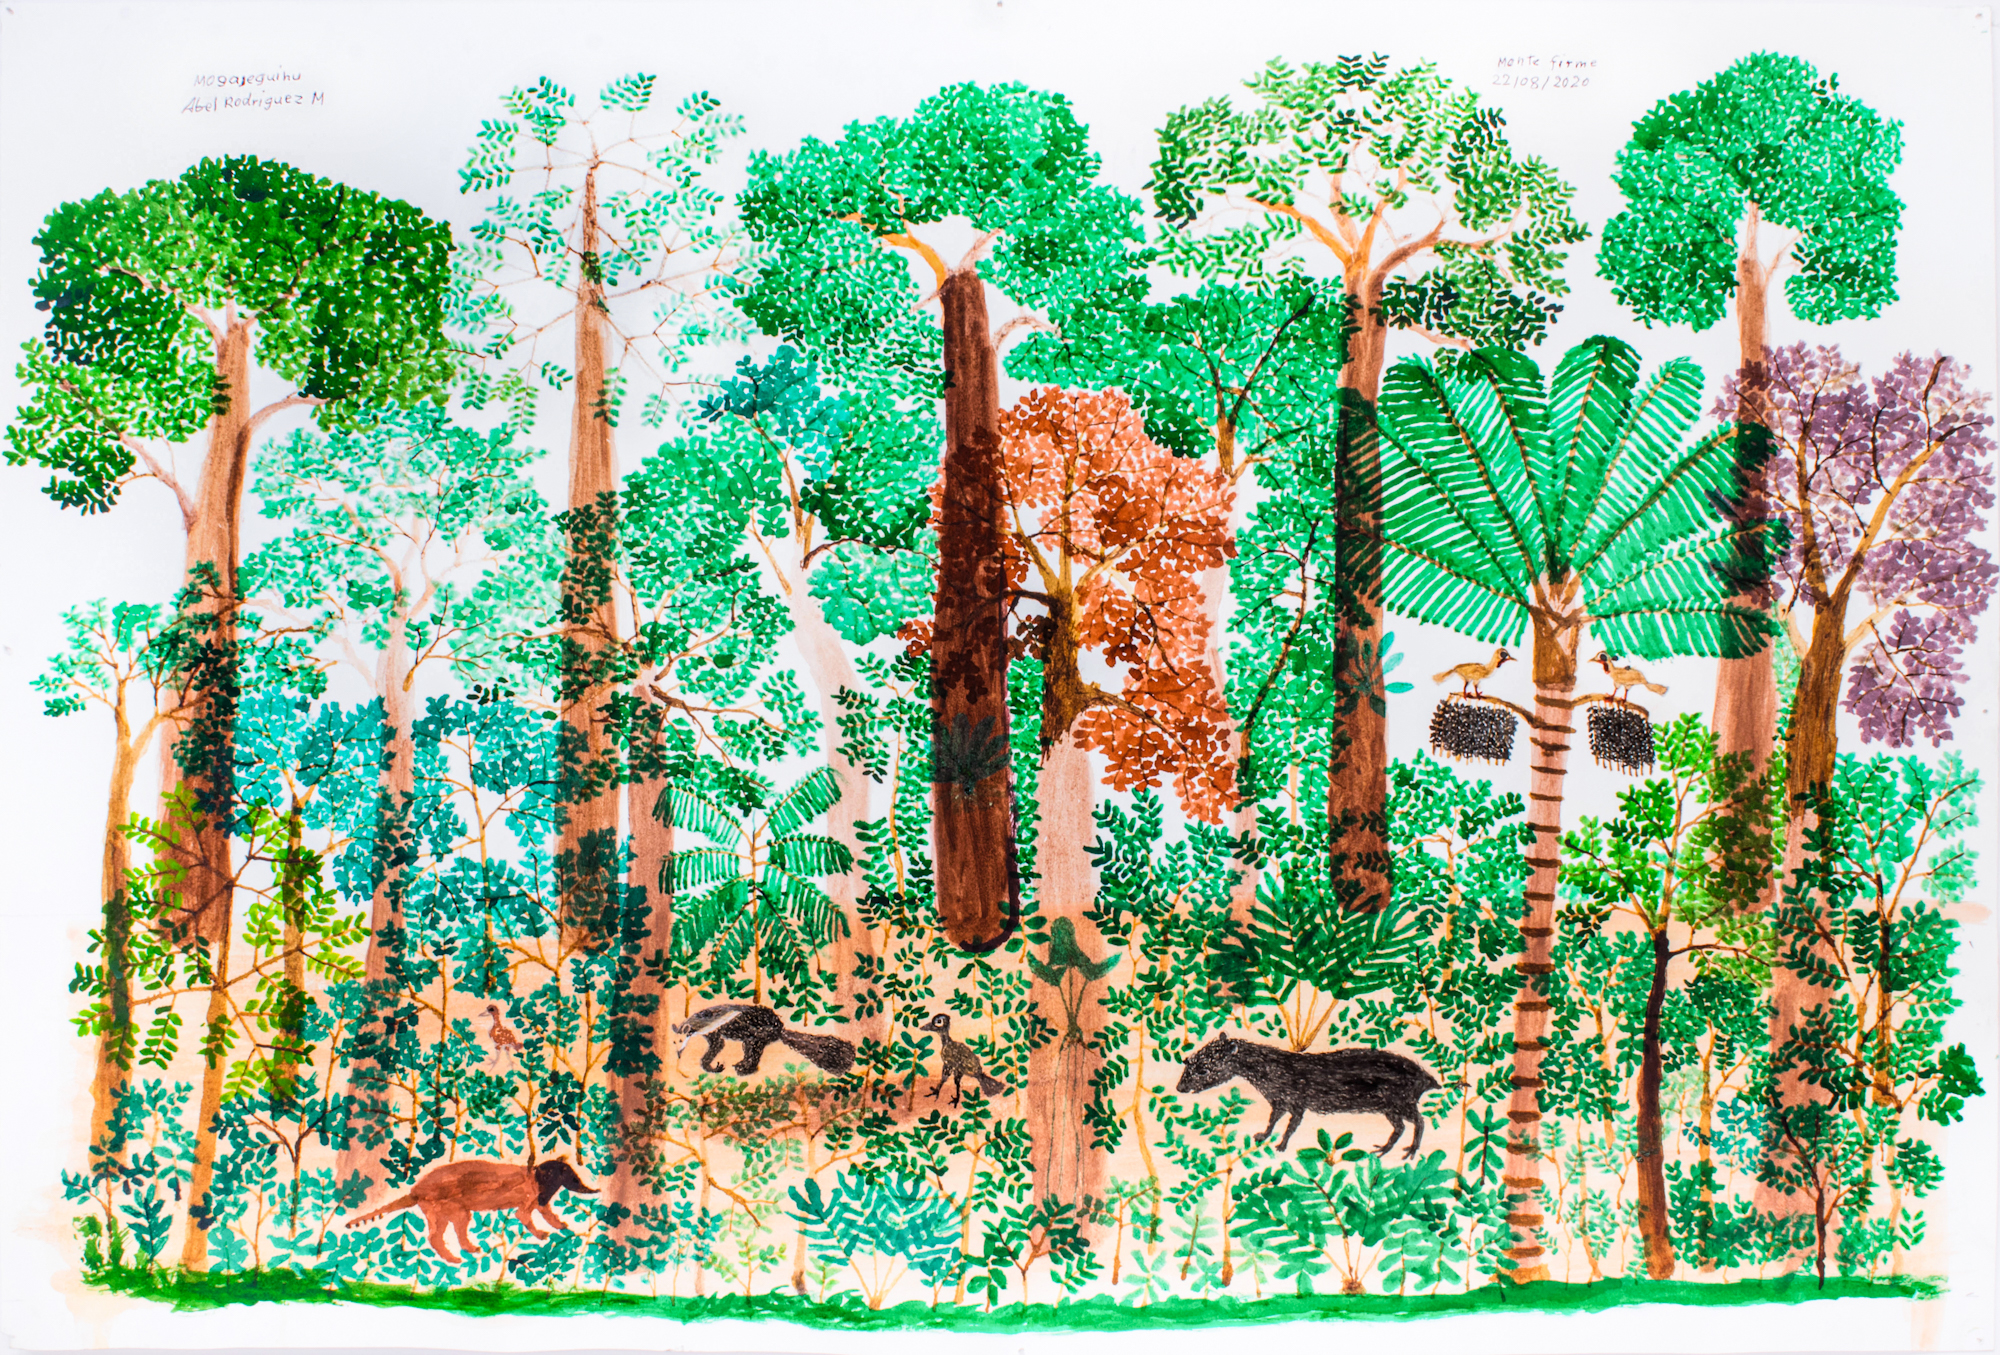 A illustration of a dense jungle showing trees and plantlife, with animals. Handwritten reads: Monte Firme 22/08/2020